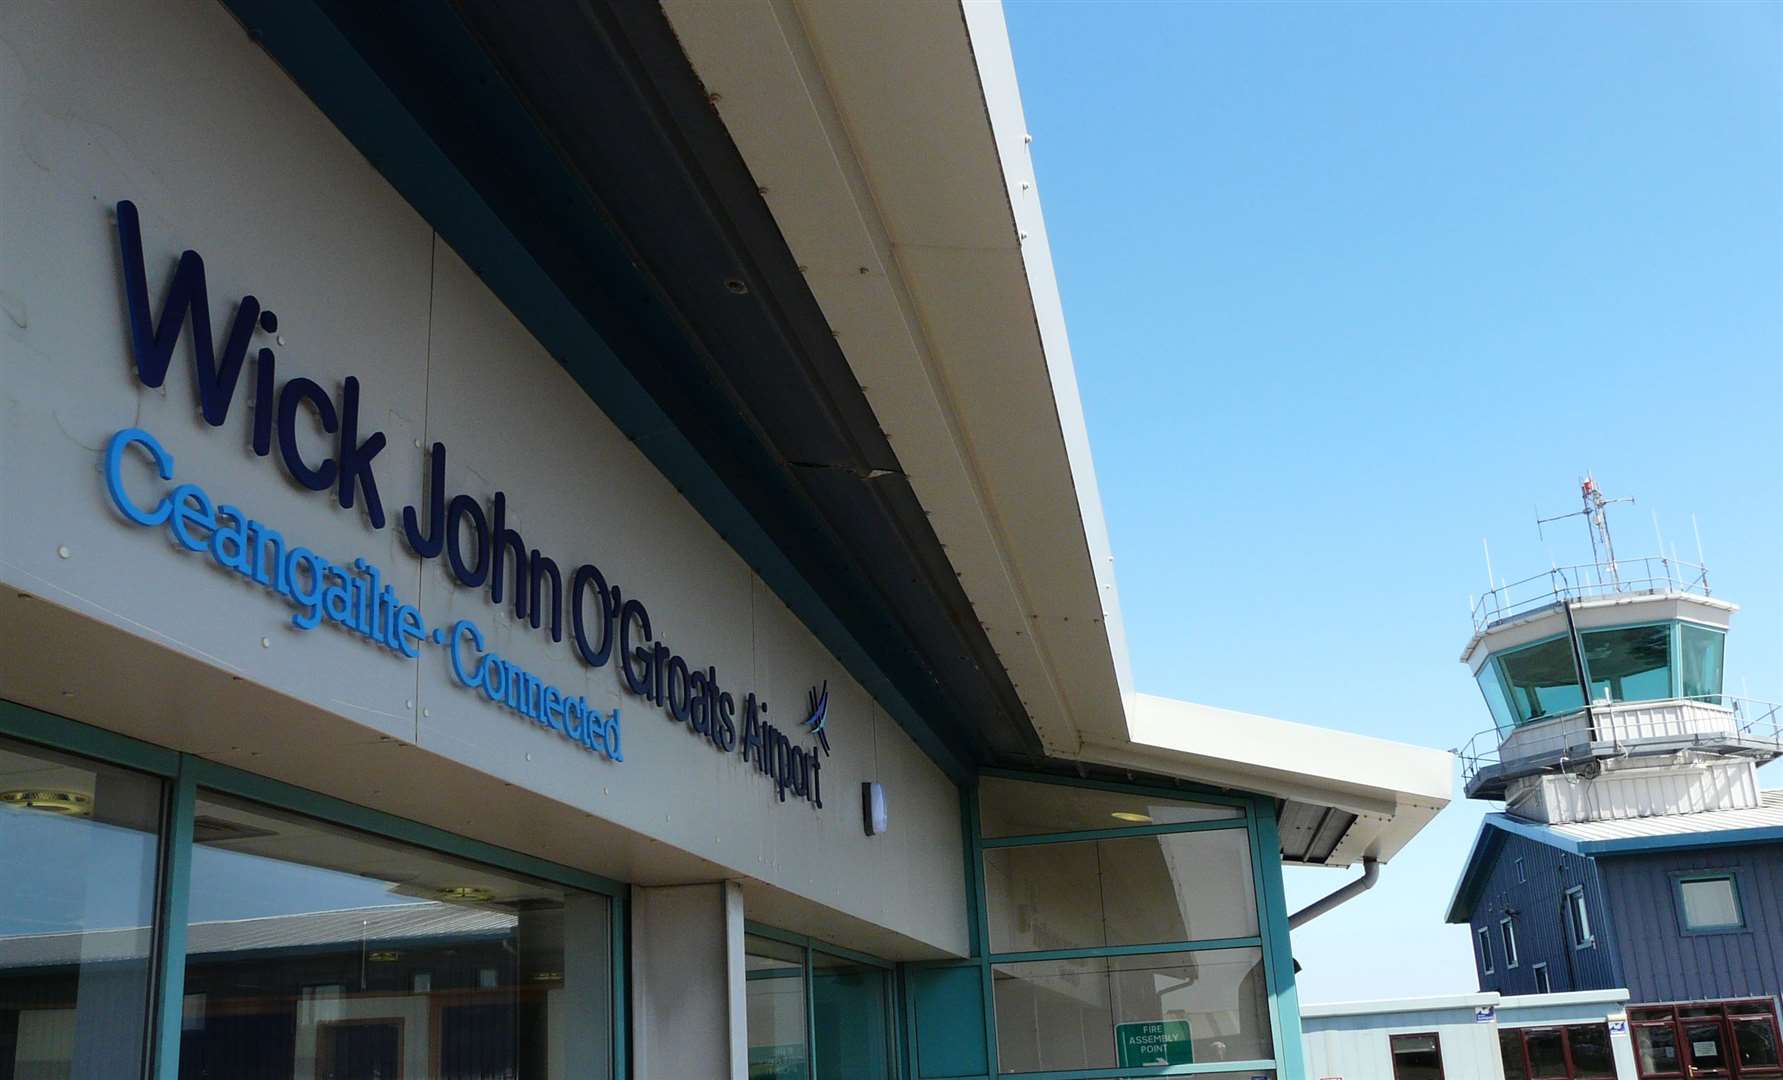 A public service obligation is 'the only way forward' for Wick John O'Groats Airport, according to Thurso and Wick Trades Union Council's Davie Alexander.